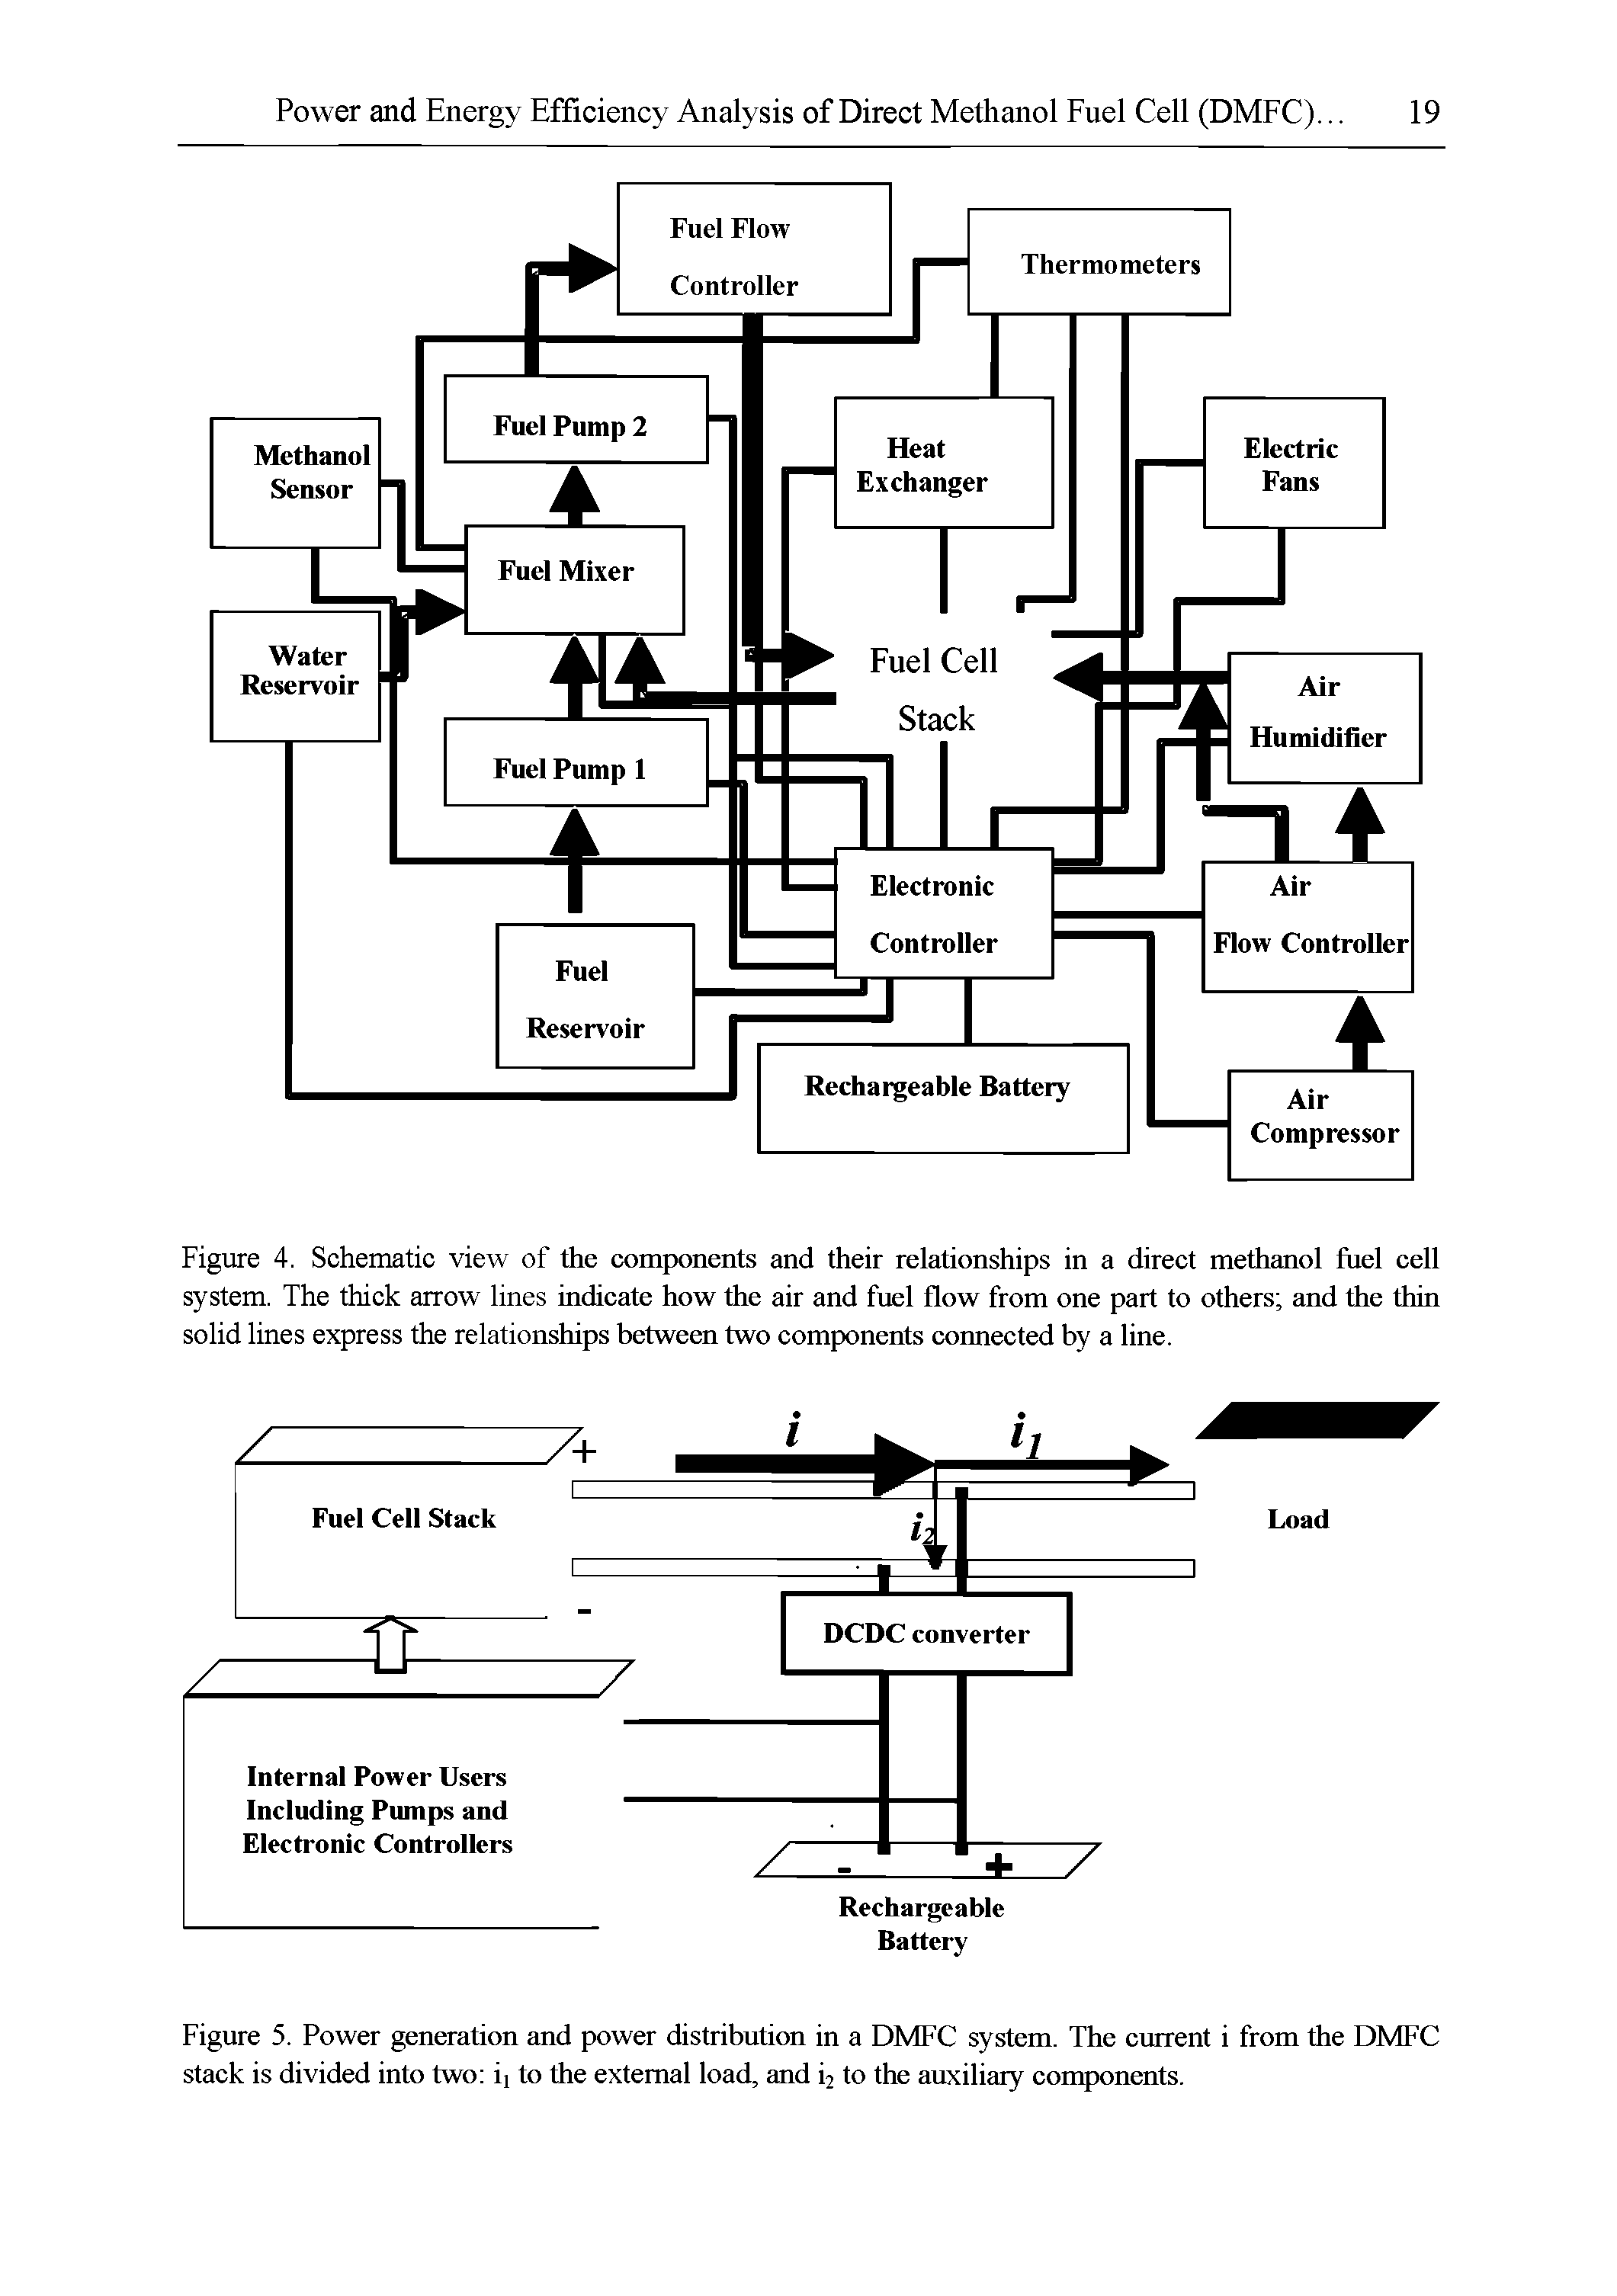 Figure 4. Schematic view of the components and their relationships in a direct methanol fuel cell system. The thick arrow lines indicate how the air and fuel flow from one part to others and the thin solid lines express the relationships between two components coimected by a line.